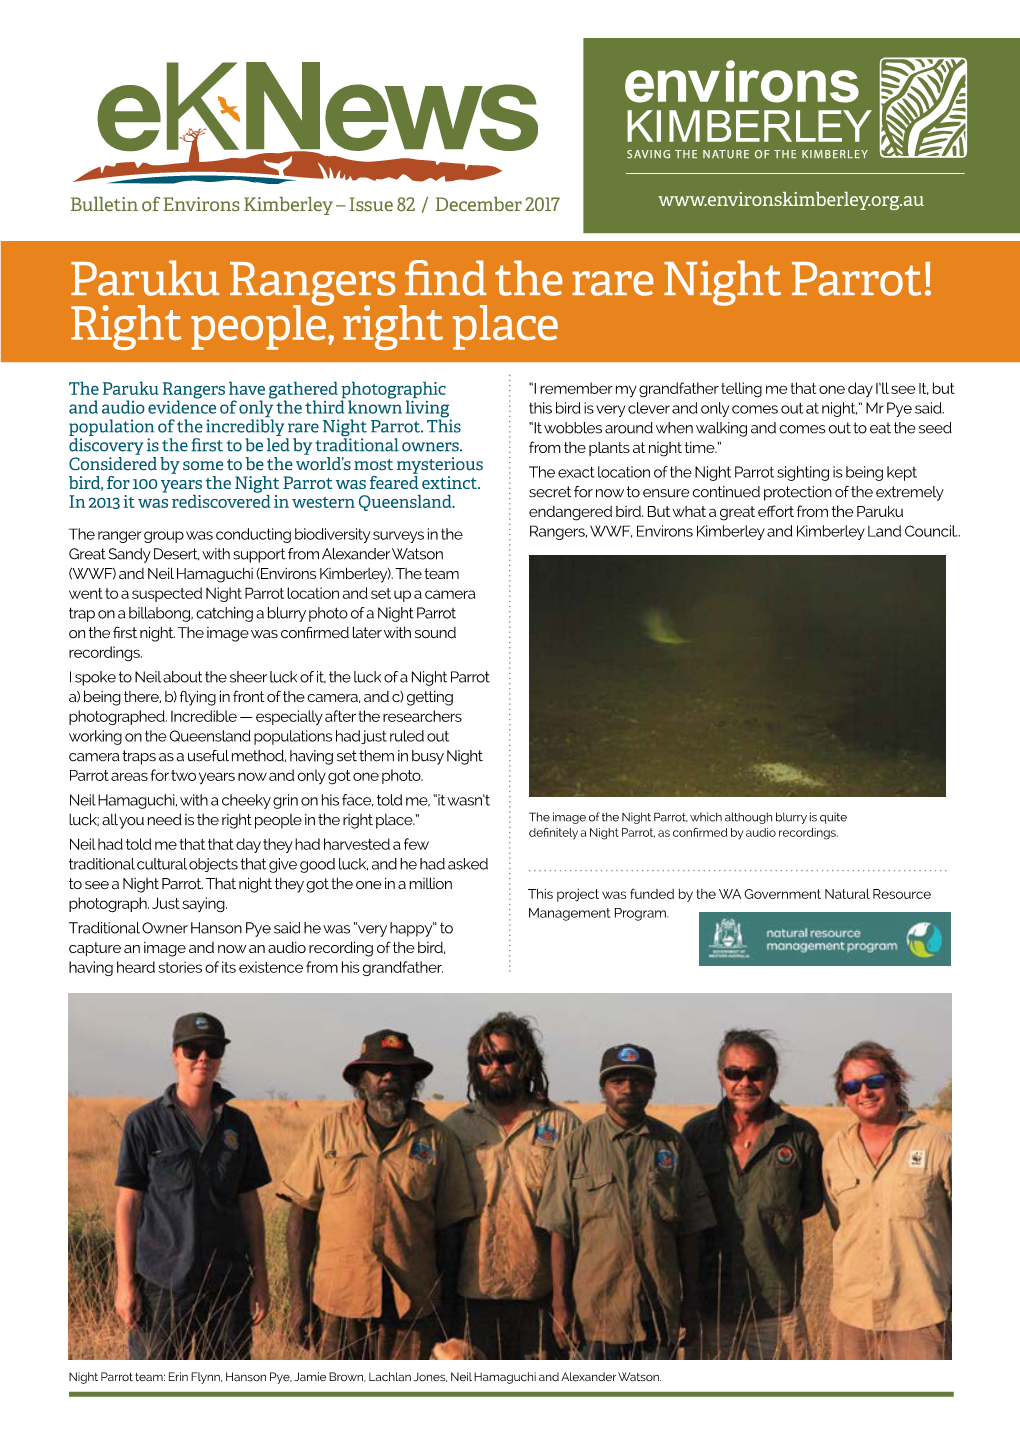 Paruku Rangers Find the Rare Night Parrot! Right People, Right Place